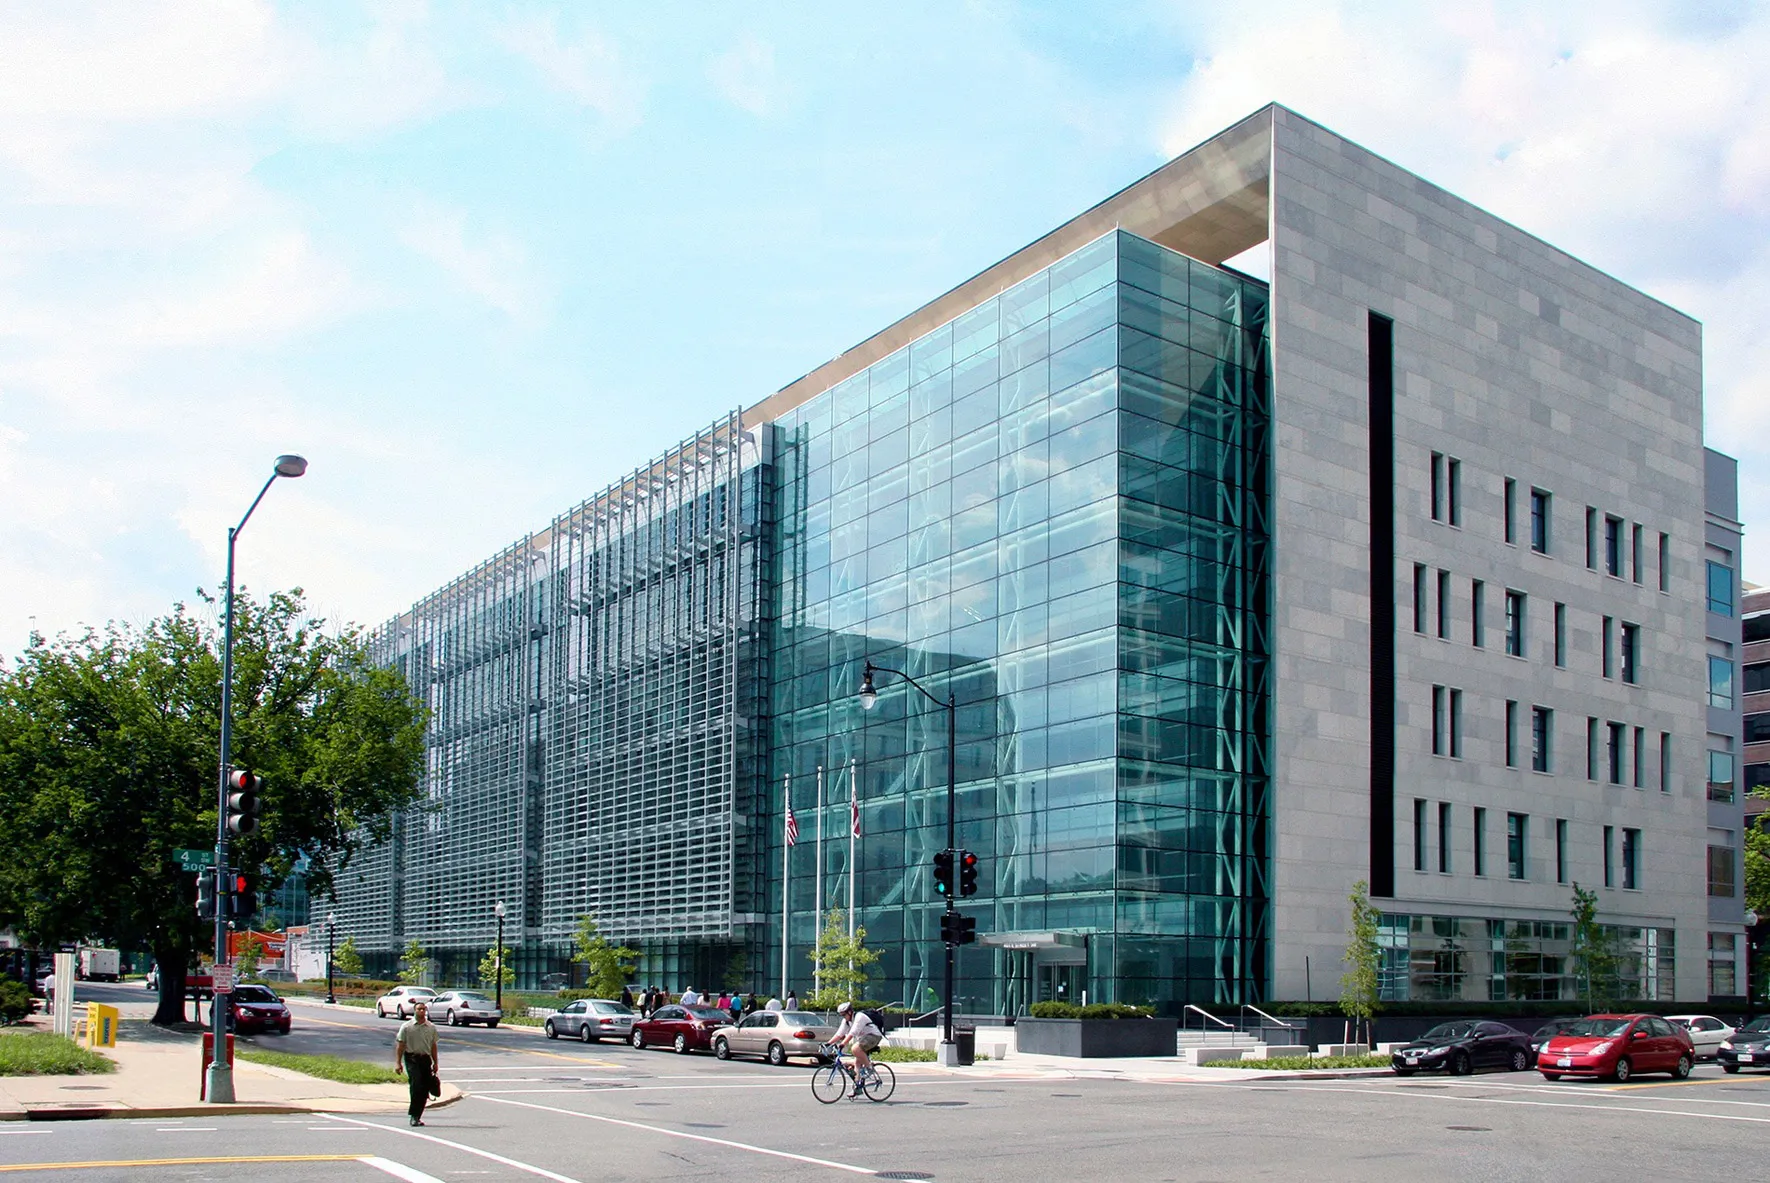 D.C. Consolidated Forensic Laboratory.